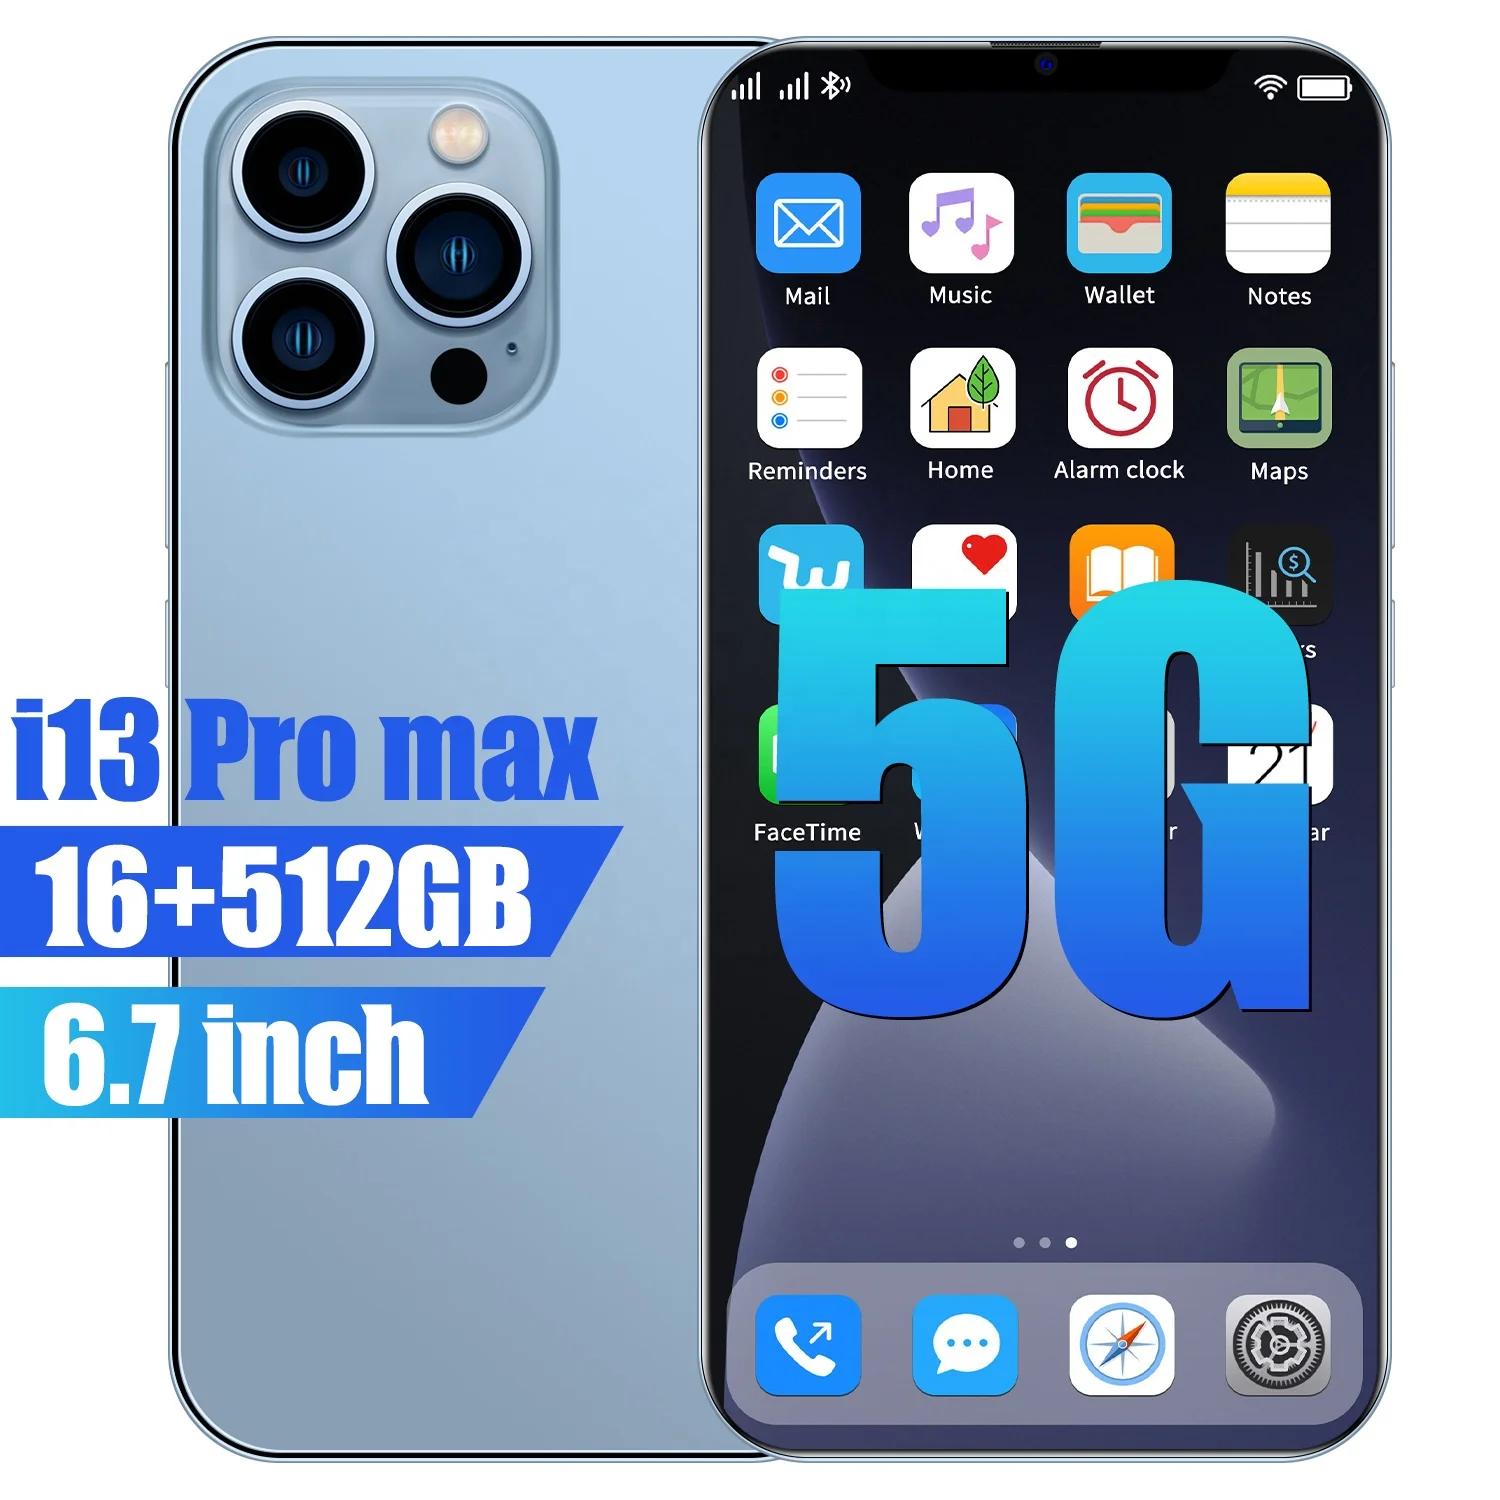 

I13 Pro Max 6.7-inch High-Definition Face Recognition Original Smartphone 16GB+512GB Long Standby Time Android Mobile Phone, Blue/black/gold/white